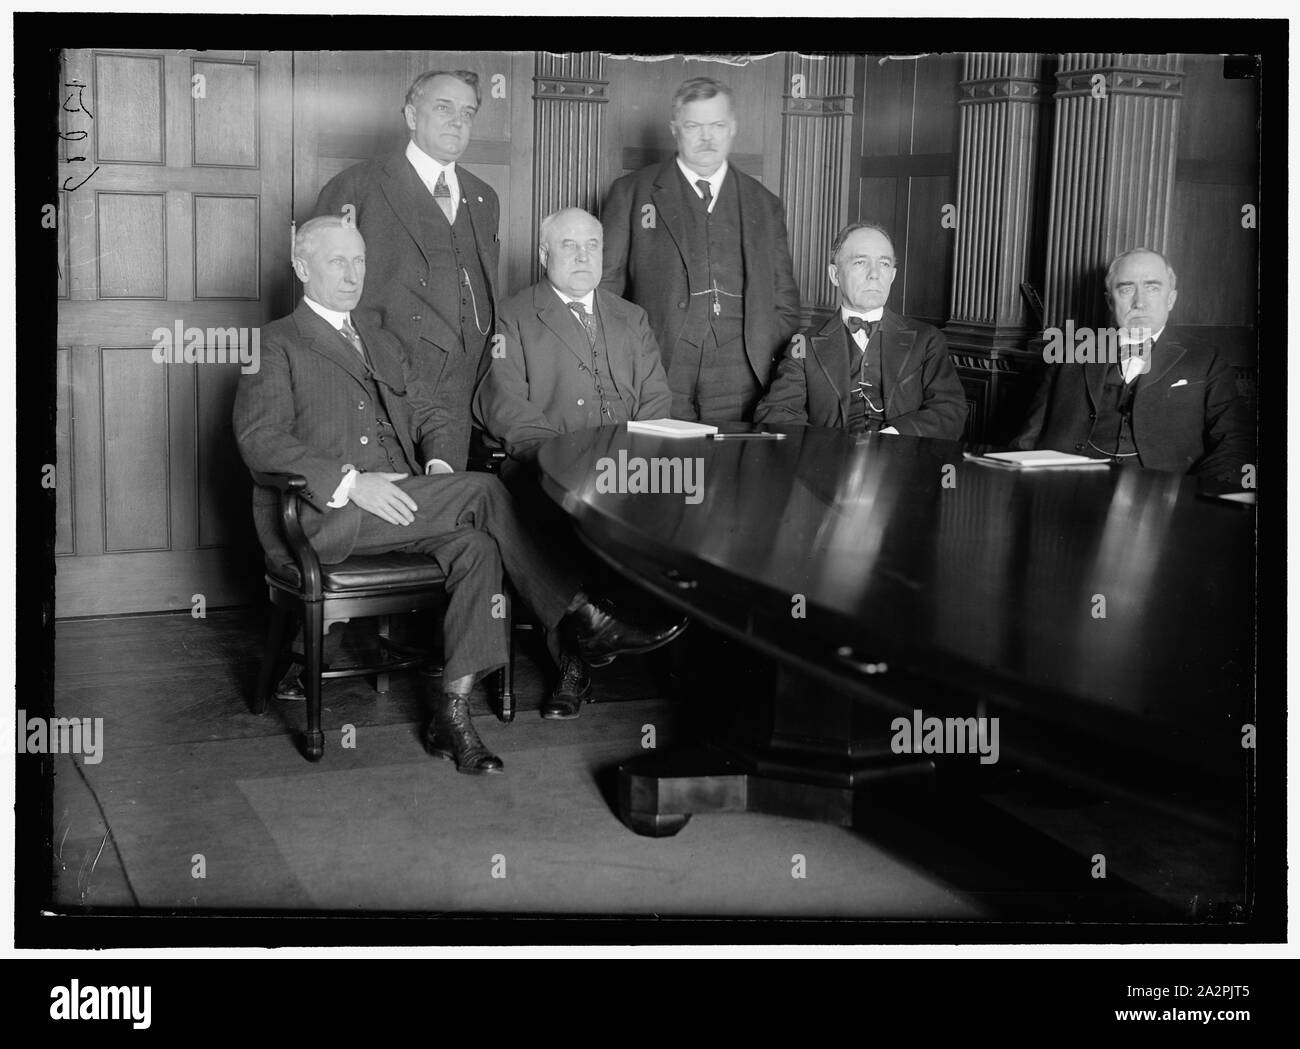 RAILWAY WAGE COMMISSION. CREATED JANUARY 18, 1918 BY DIRECTOR GENERAL OF RAILROADS. SEATED: J.H. COVINGTON; FRANKLIN K. LANE; CHARLES C. McCHORD; WILLIAM R. WILCOX. STANDING: W.A. RYAN; F.W. LEHMAN Stock Photo